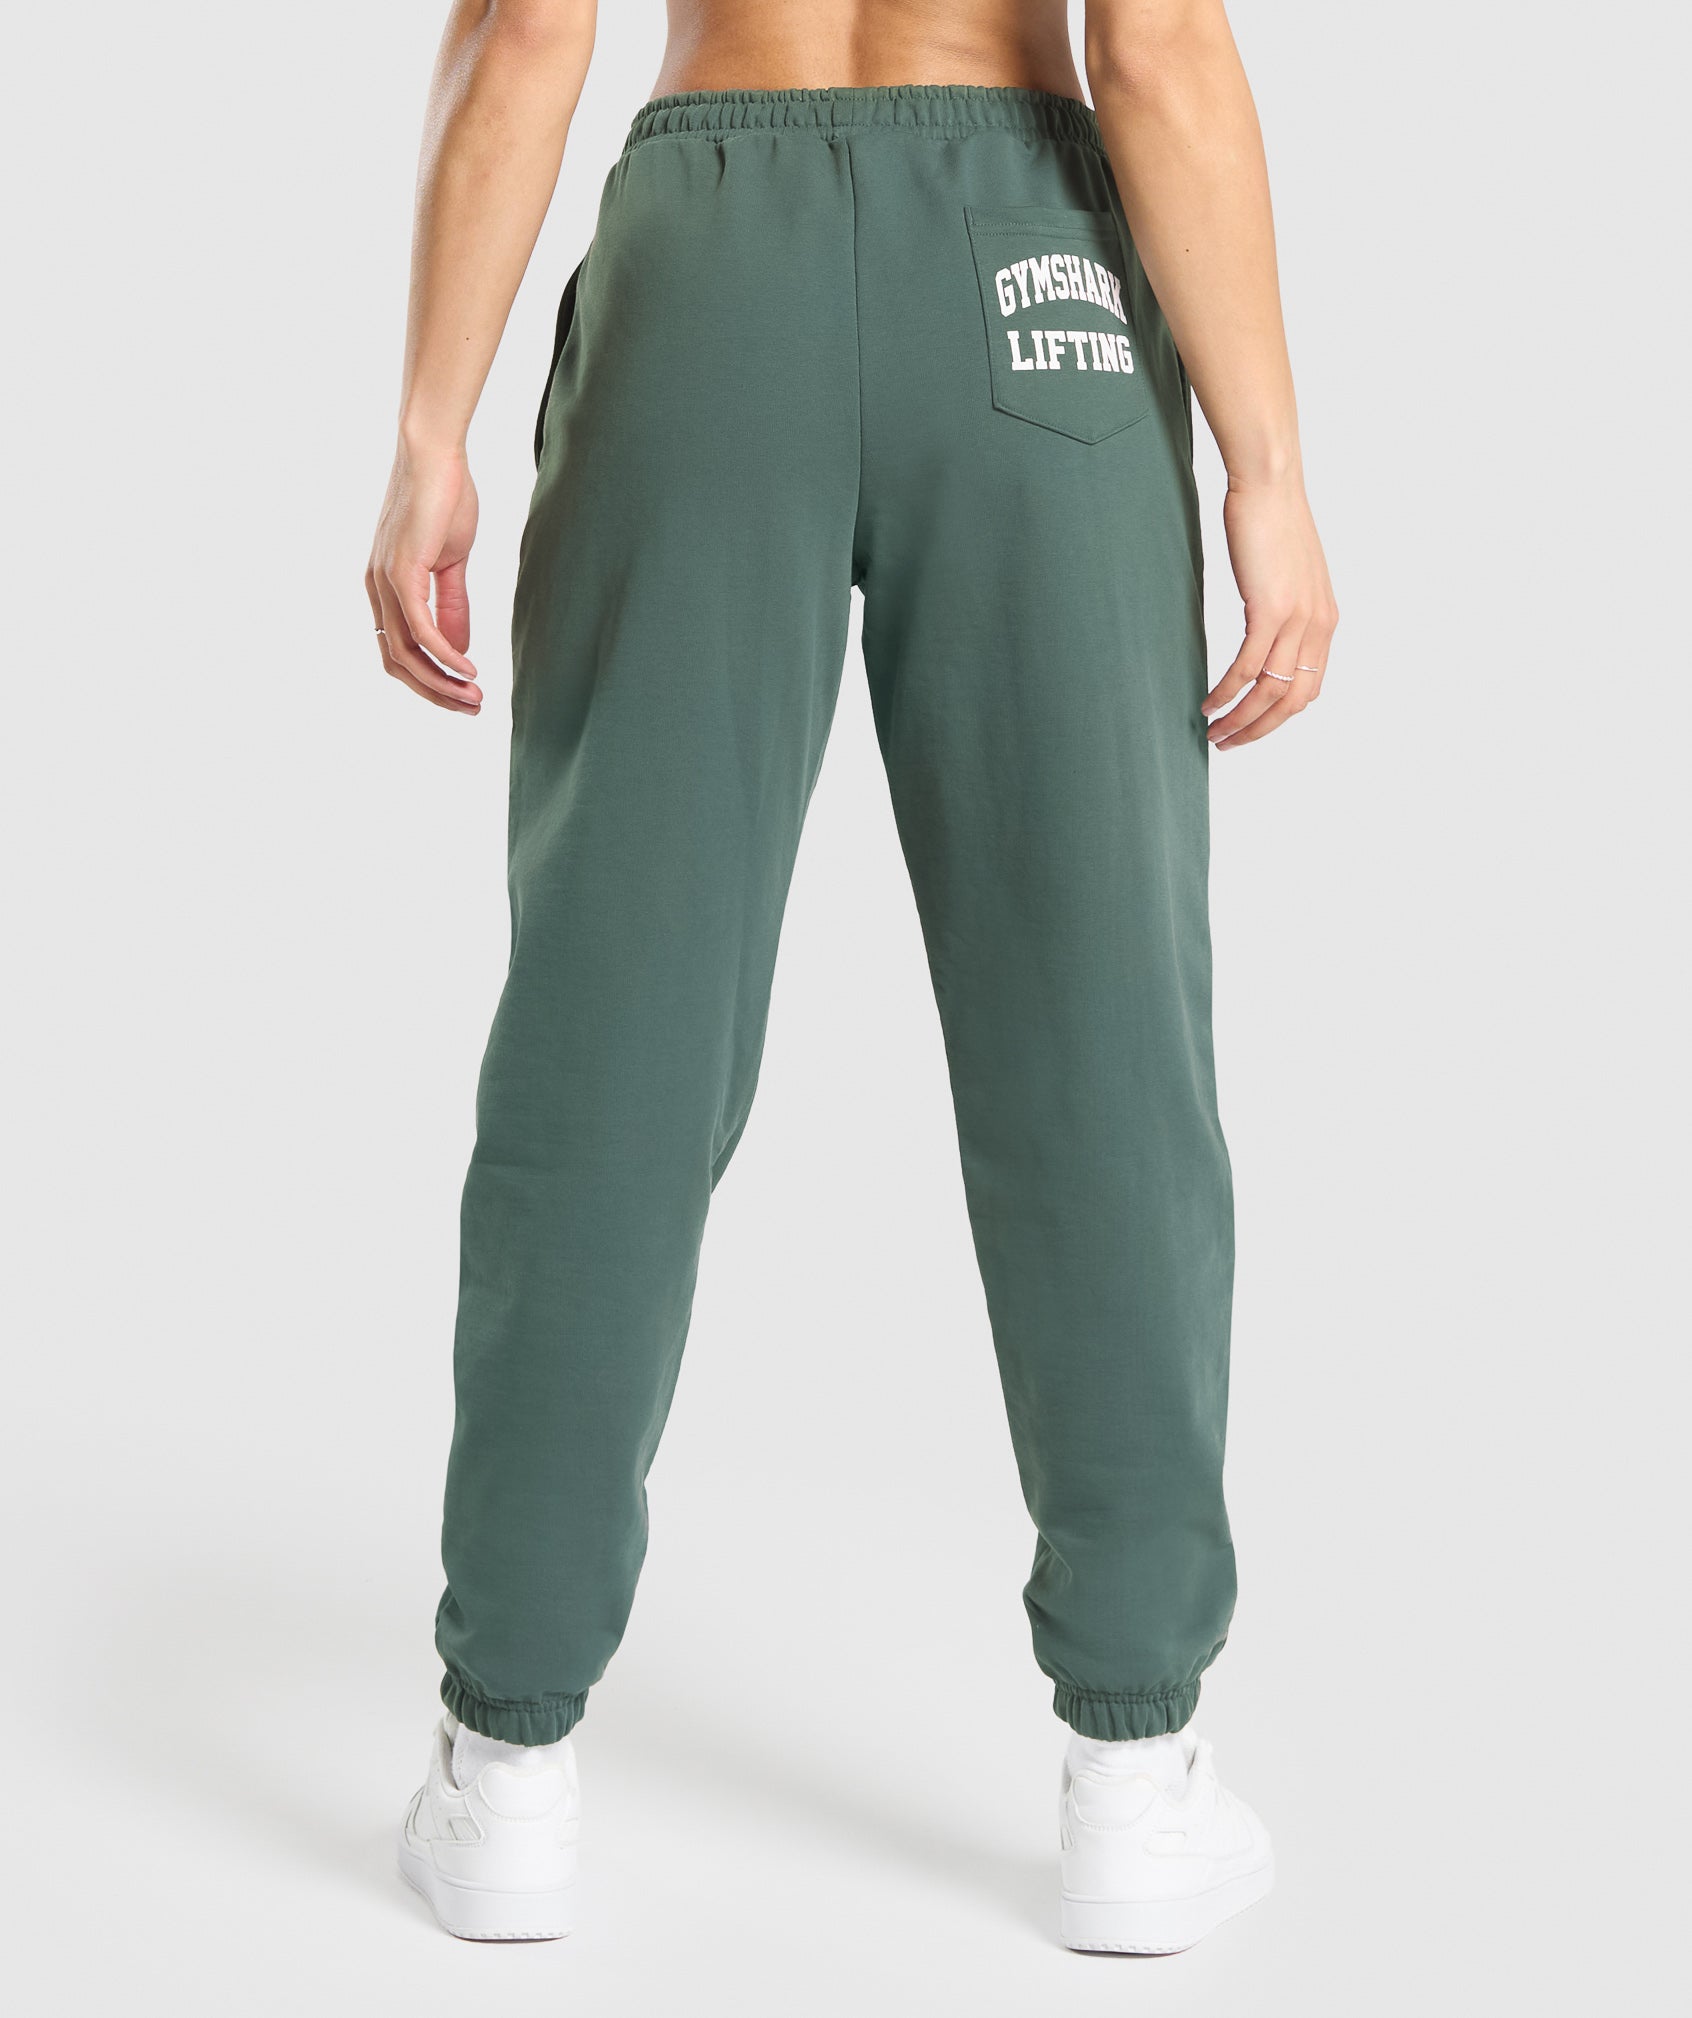 Lifting Graphic Oversized Joggers